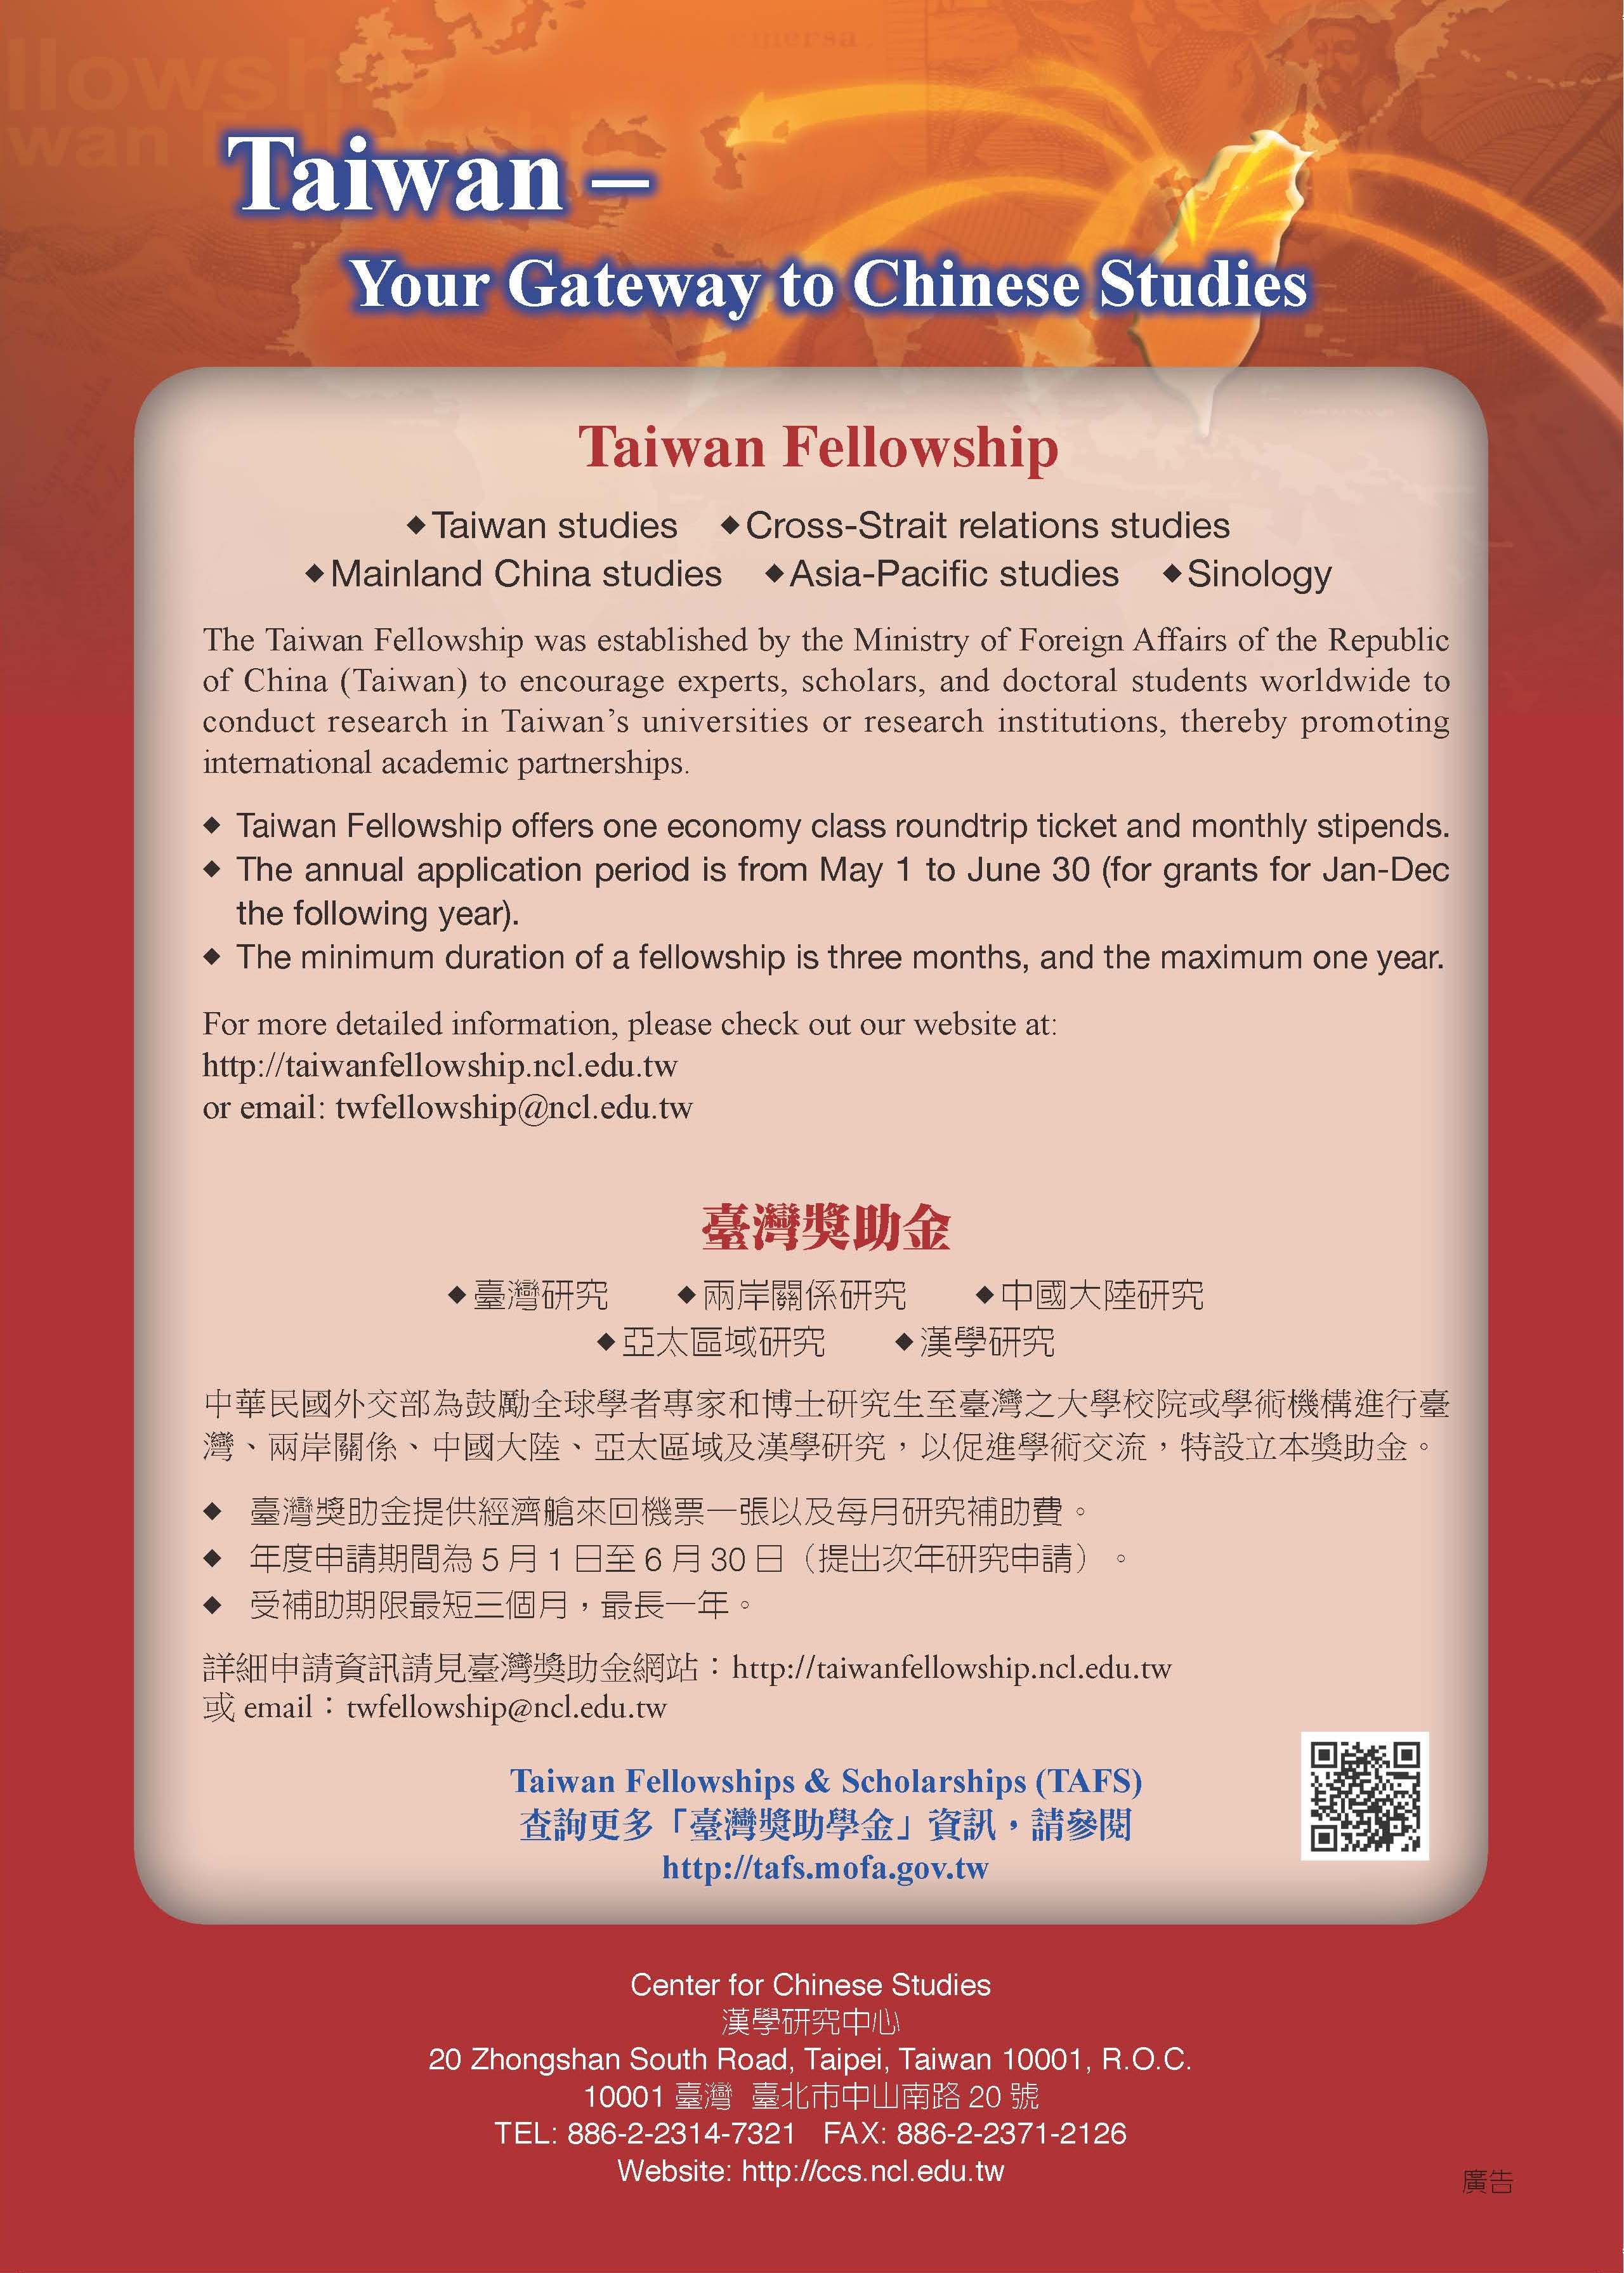 Apply Online for the Taiwan Fellowship from May 1 to June 30.